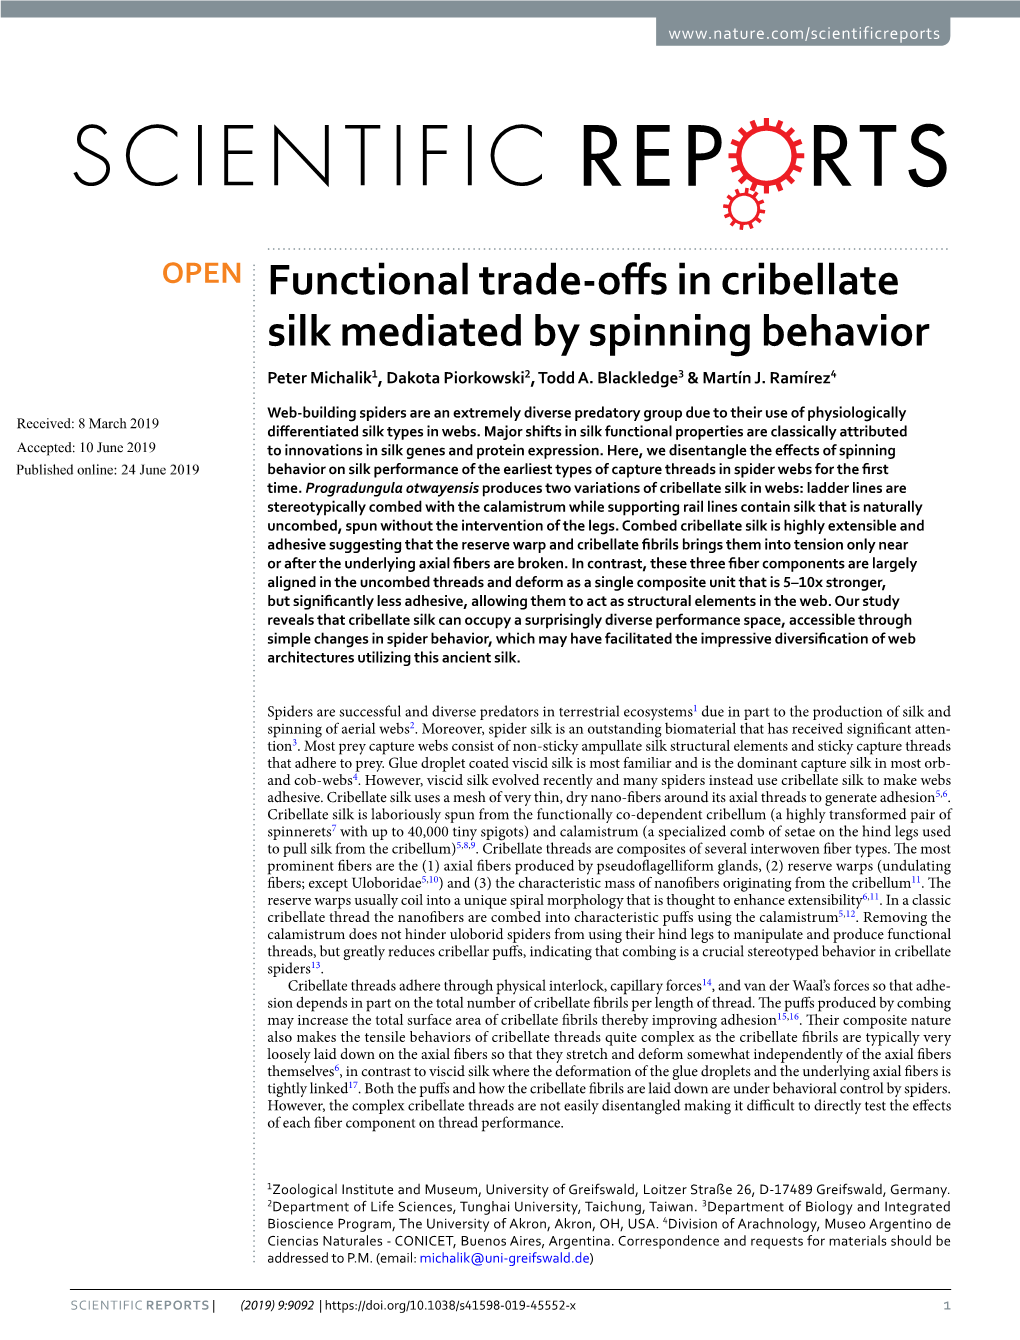 Functional Trade-Offs in Cribellate Silk Mediated by Spinning Behavior